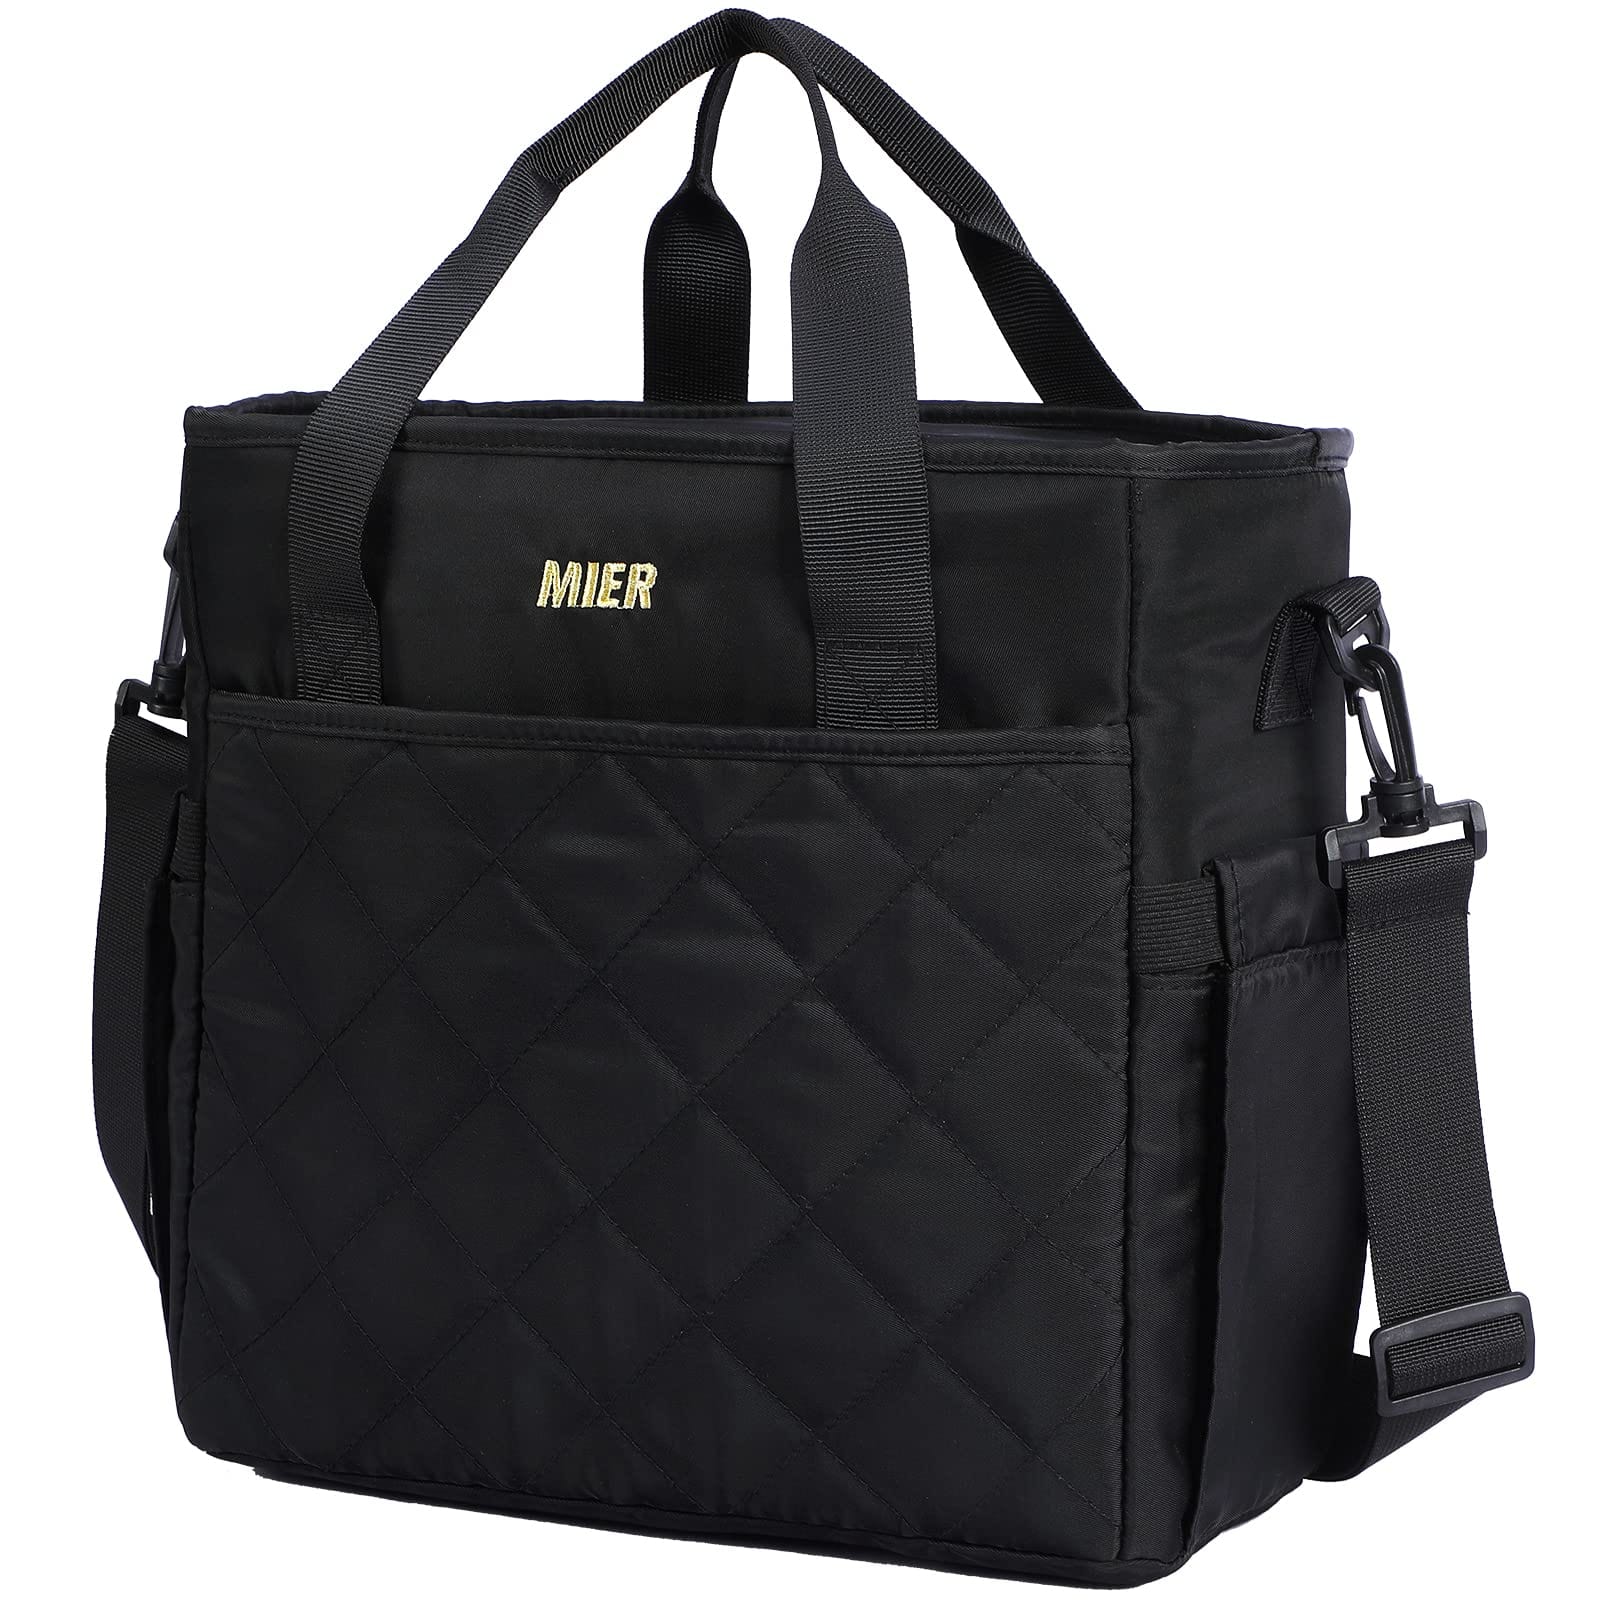 Insulated Lunch Bag for Women Mens Large Lunch Tote Bags Lunch Bag Black MIER